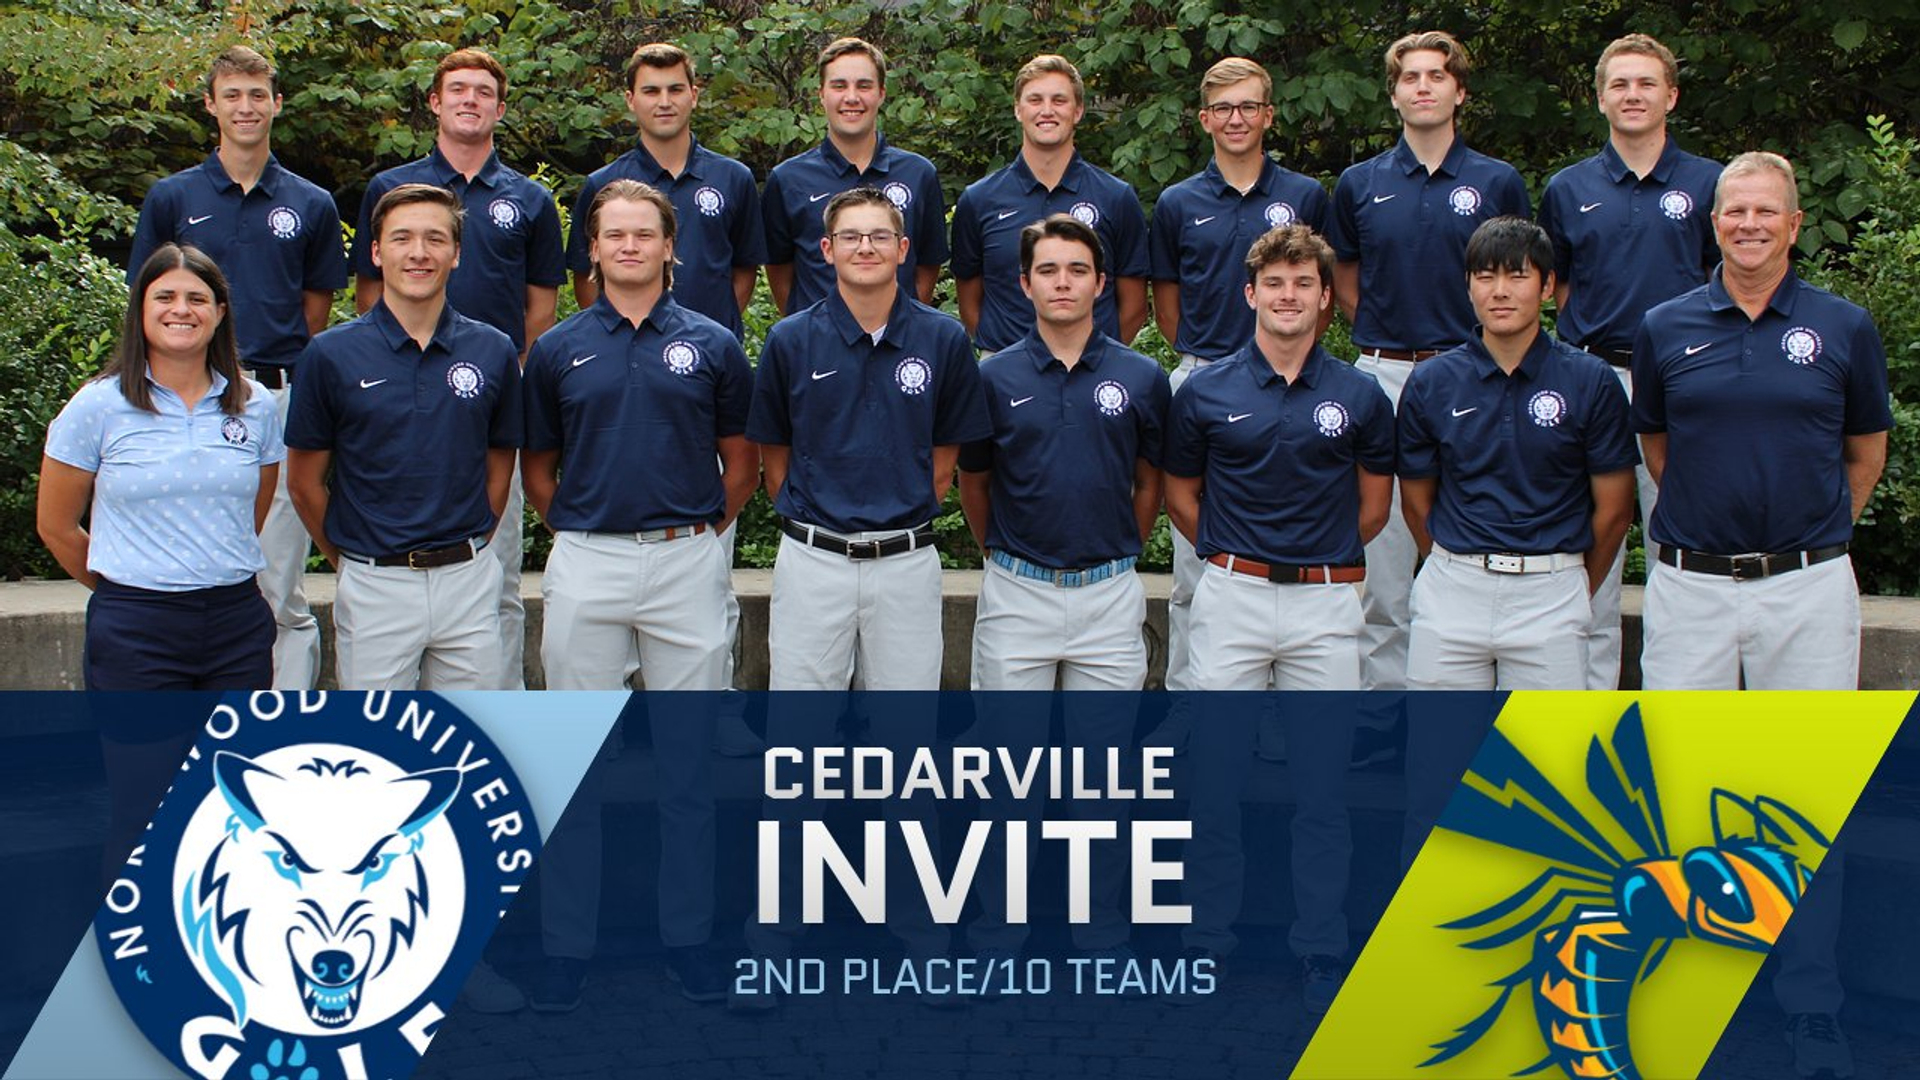 Men's Golf Moves Up On Final Day For Second Place Finish At Cedarville Invitational